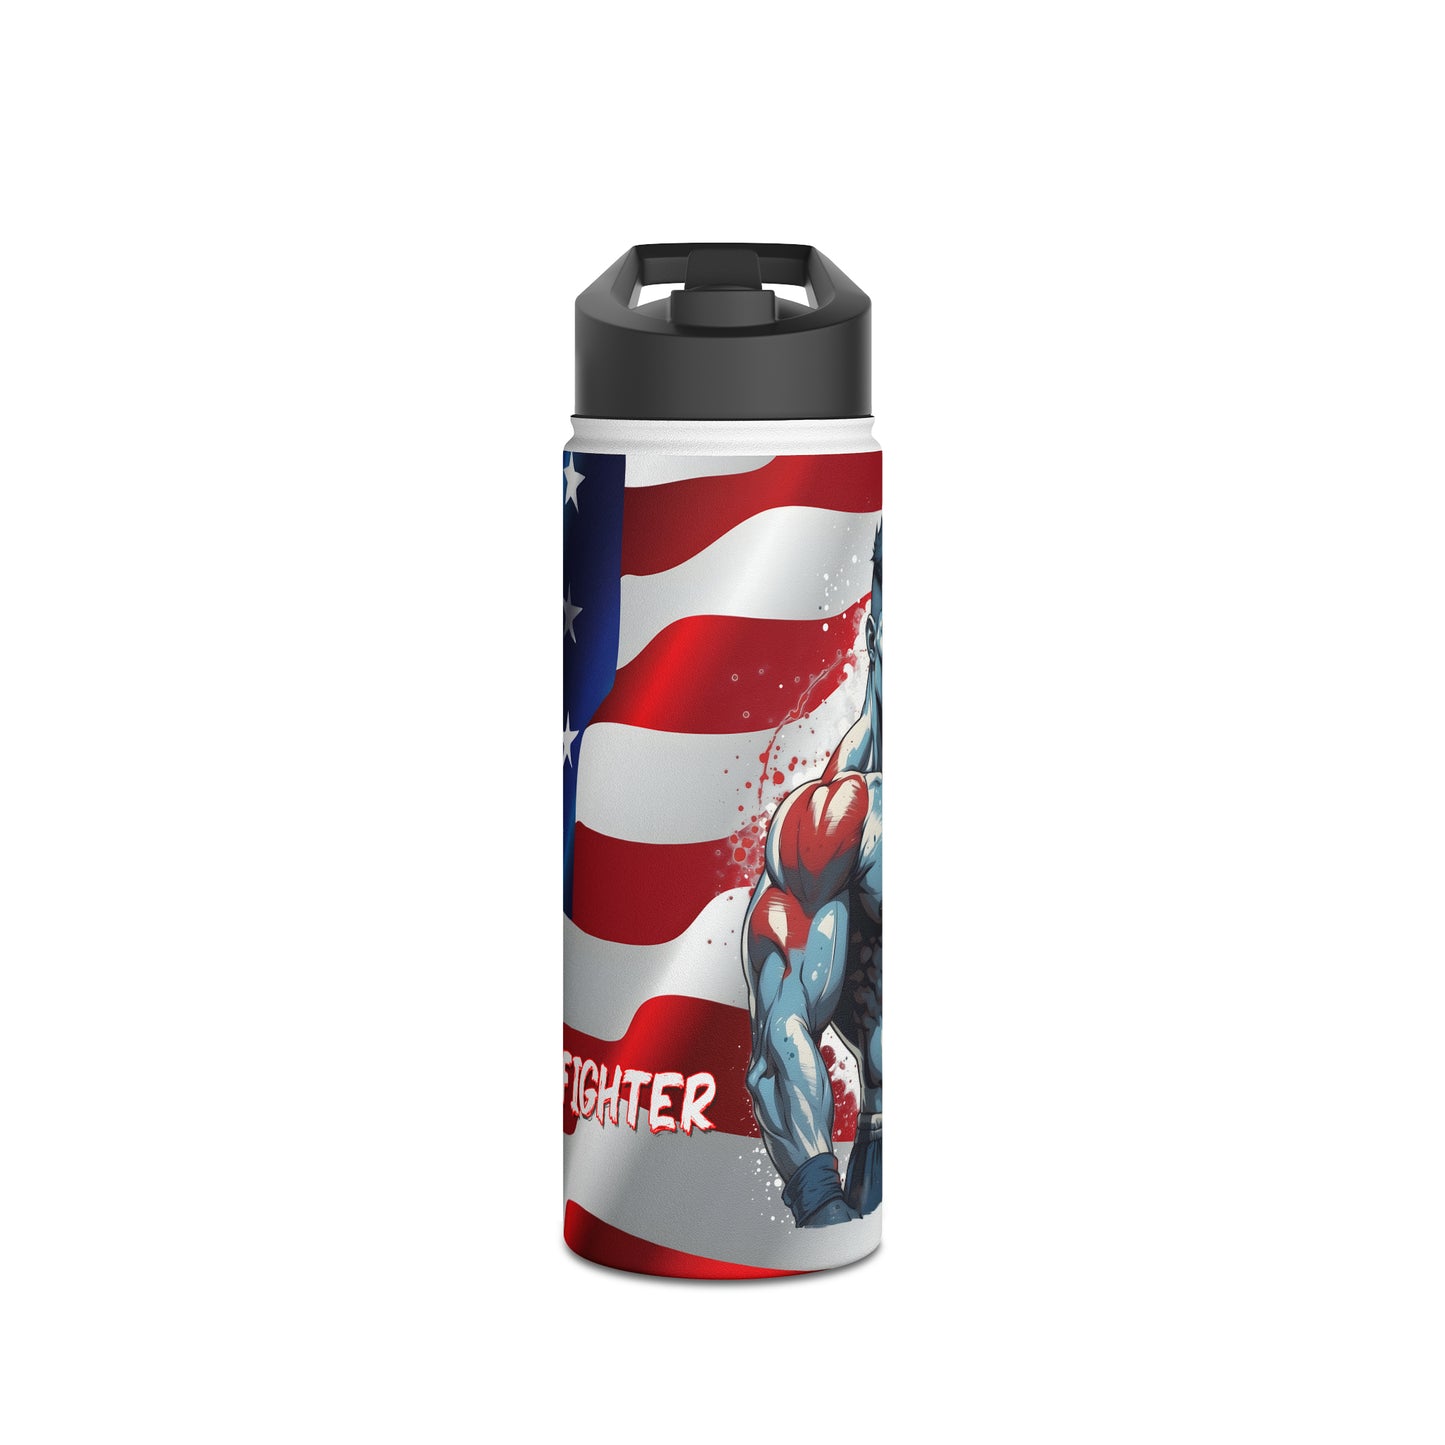 Kǎtōng Piàn - Prized Fighter Collection - America - 003 - Stainless Steel Water Bottle, Standard Lid